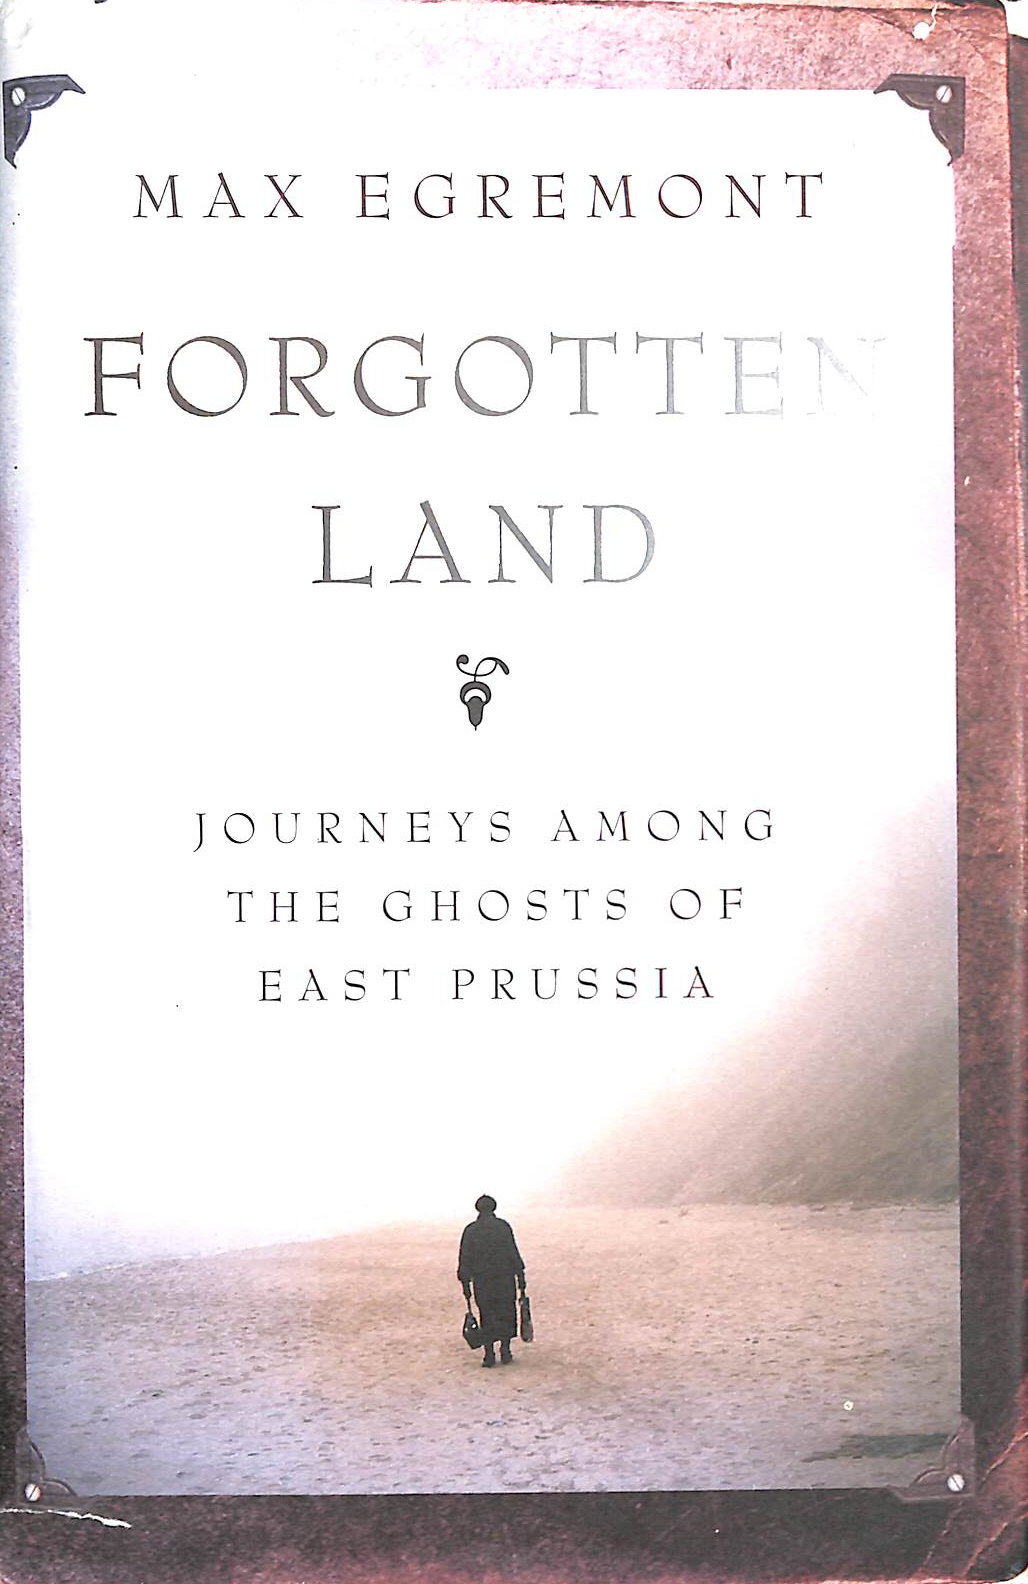 MAX EGREMONT - Forgotten Land: Journeys Among the Ghosts of East Prussia